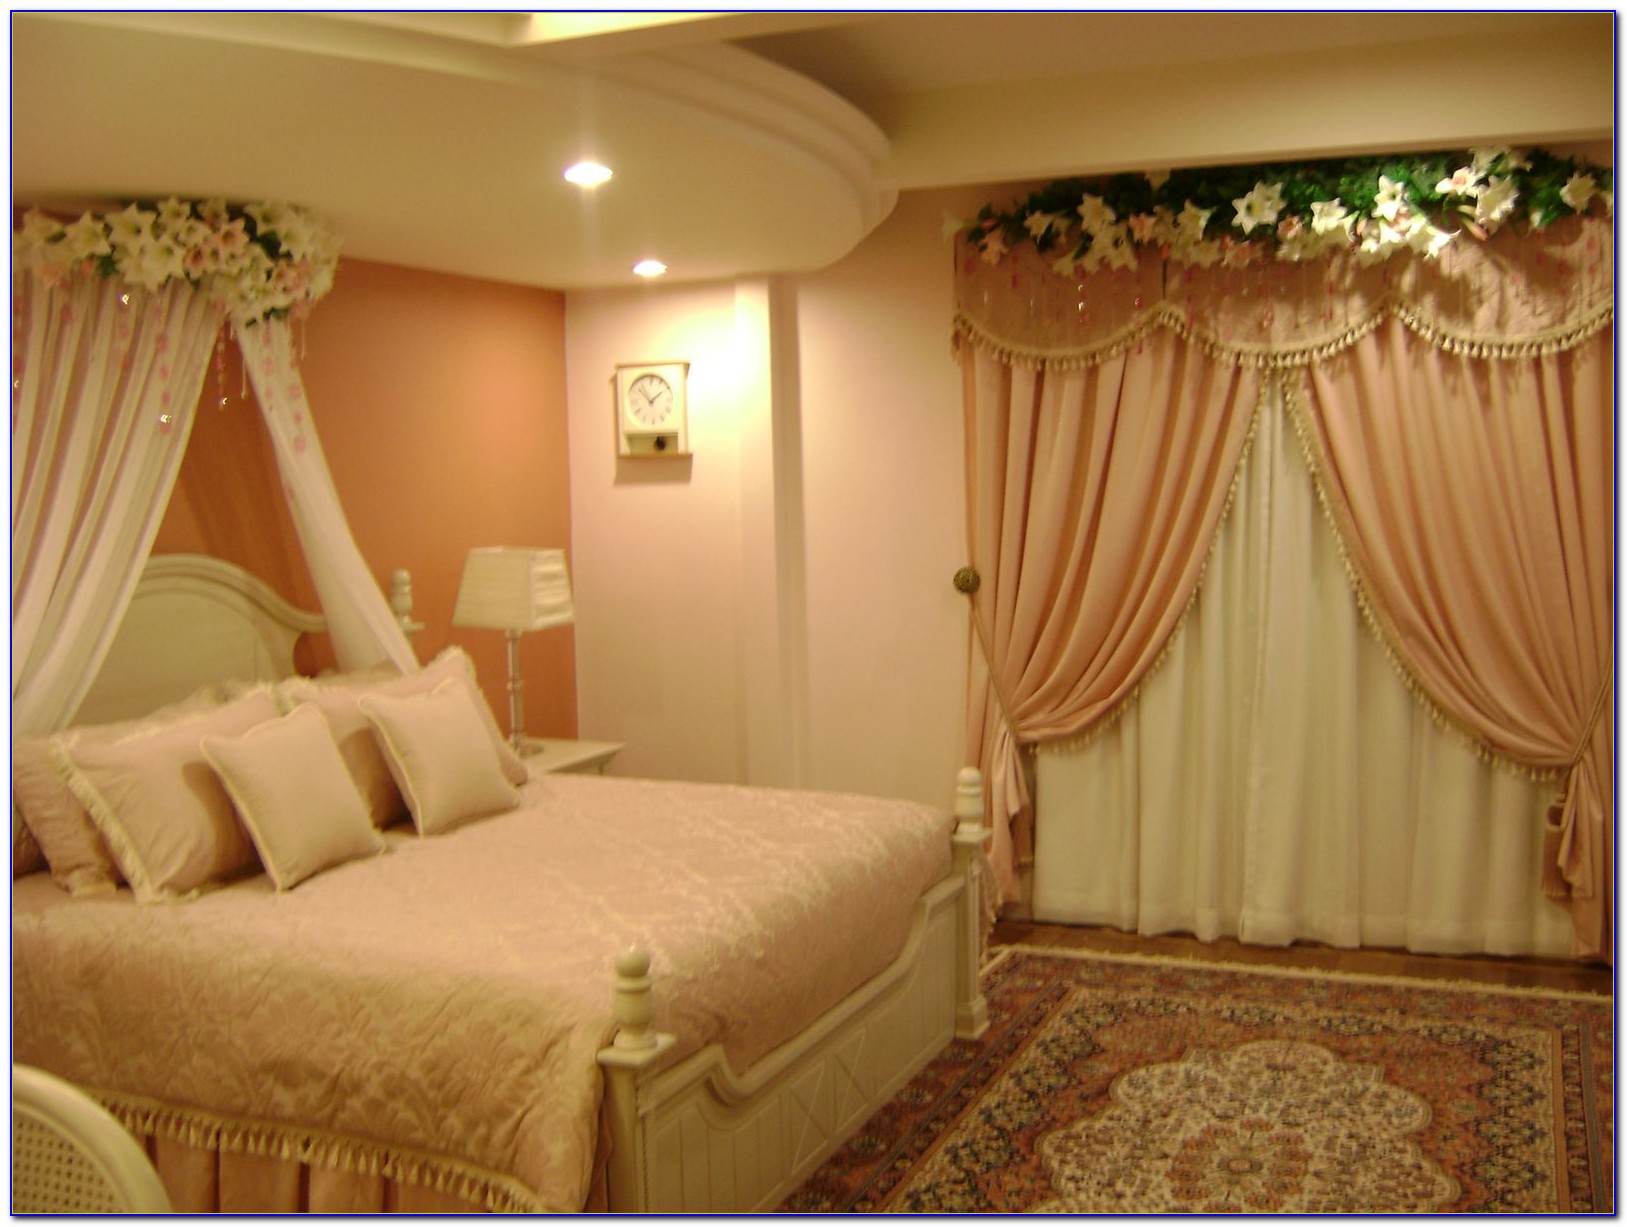 Hanging Ceiling Decorations For Bedroom Bedroom Home